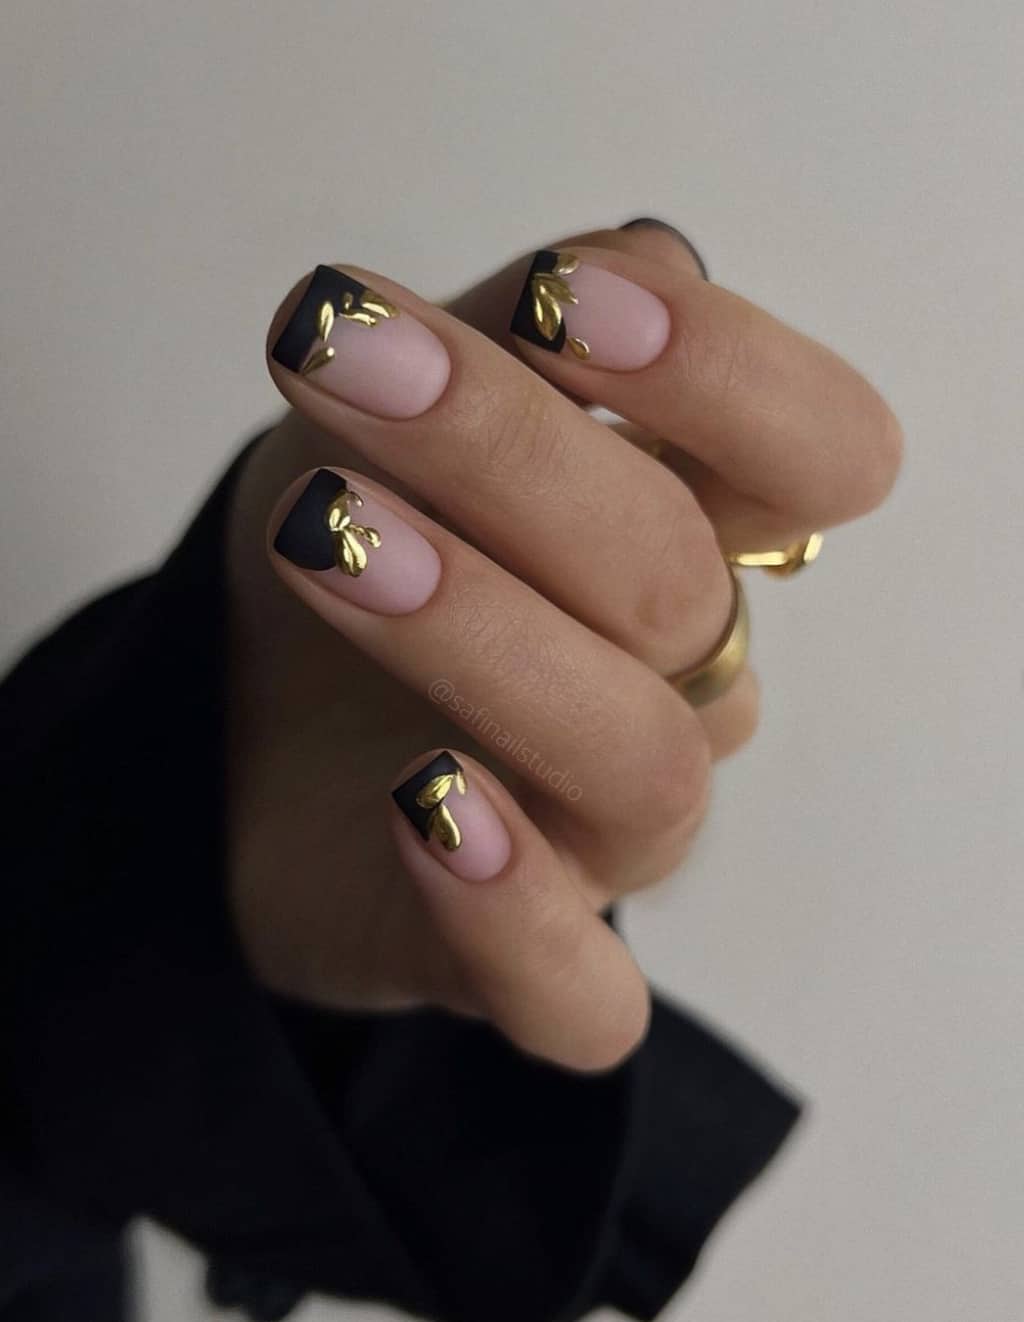 A hand with short square nails featuring black French tips and gold leaf accents